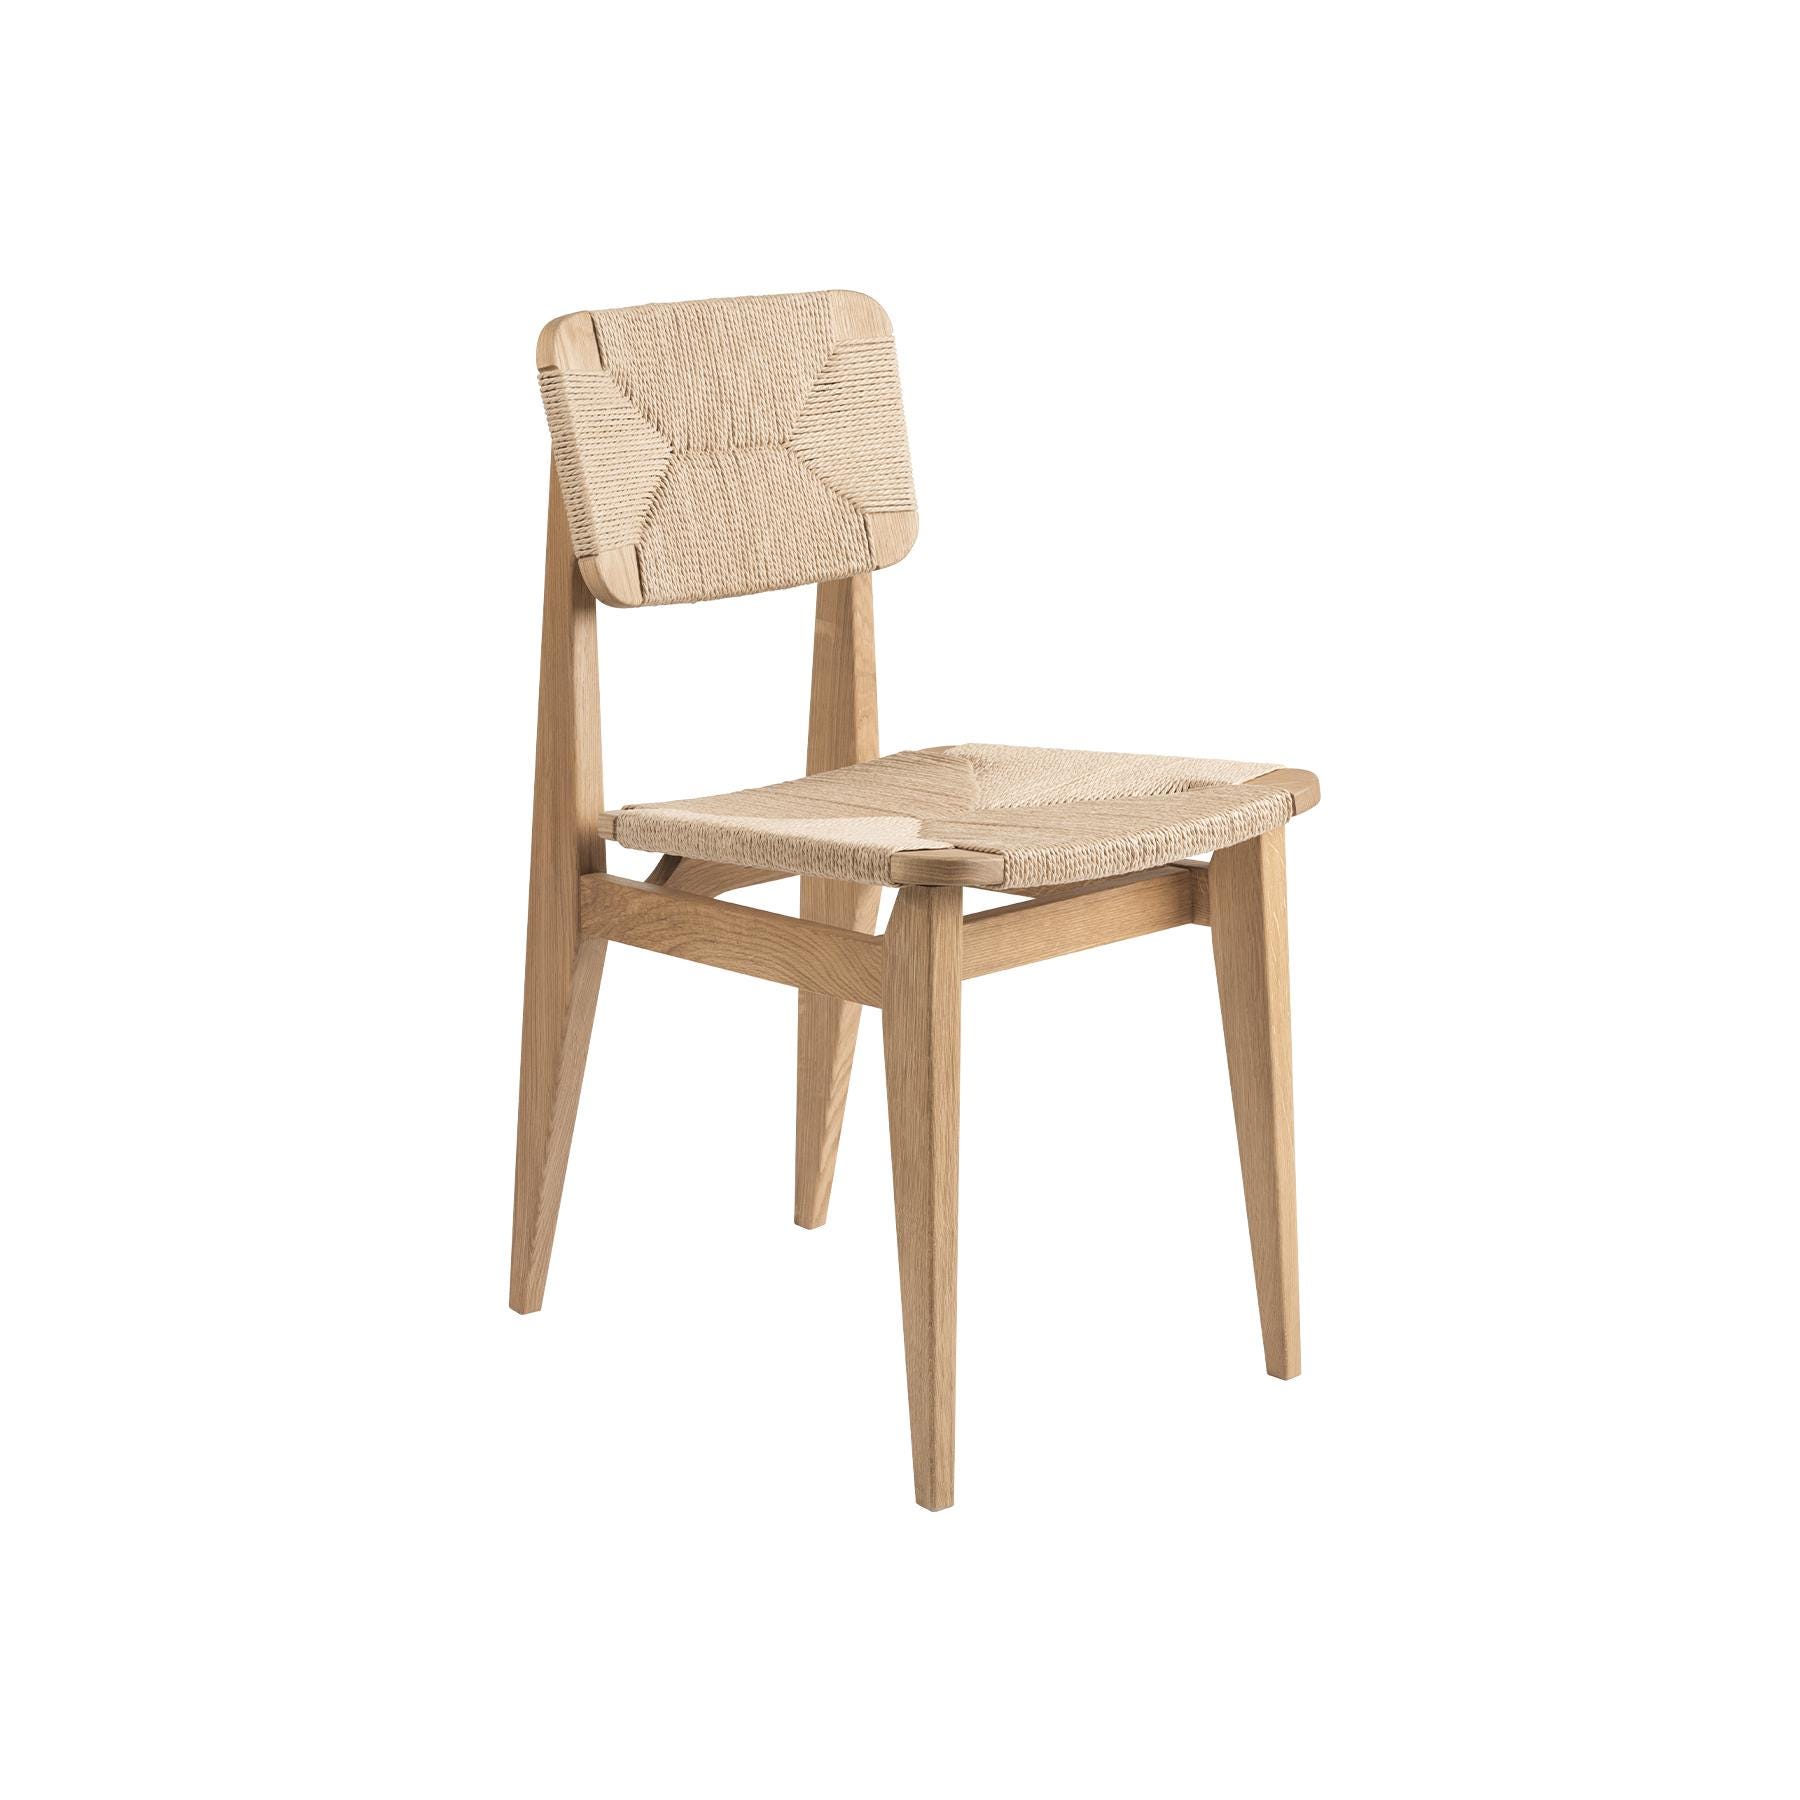 Gubi Cchair Dining Chair Paper Cord Oiled Oak Light Wood Designer Furniture From Holloways Of Ludlow